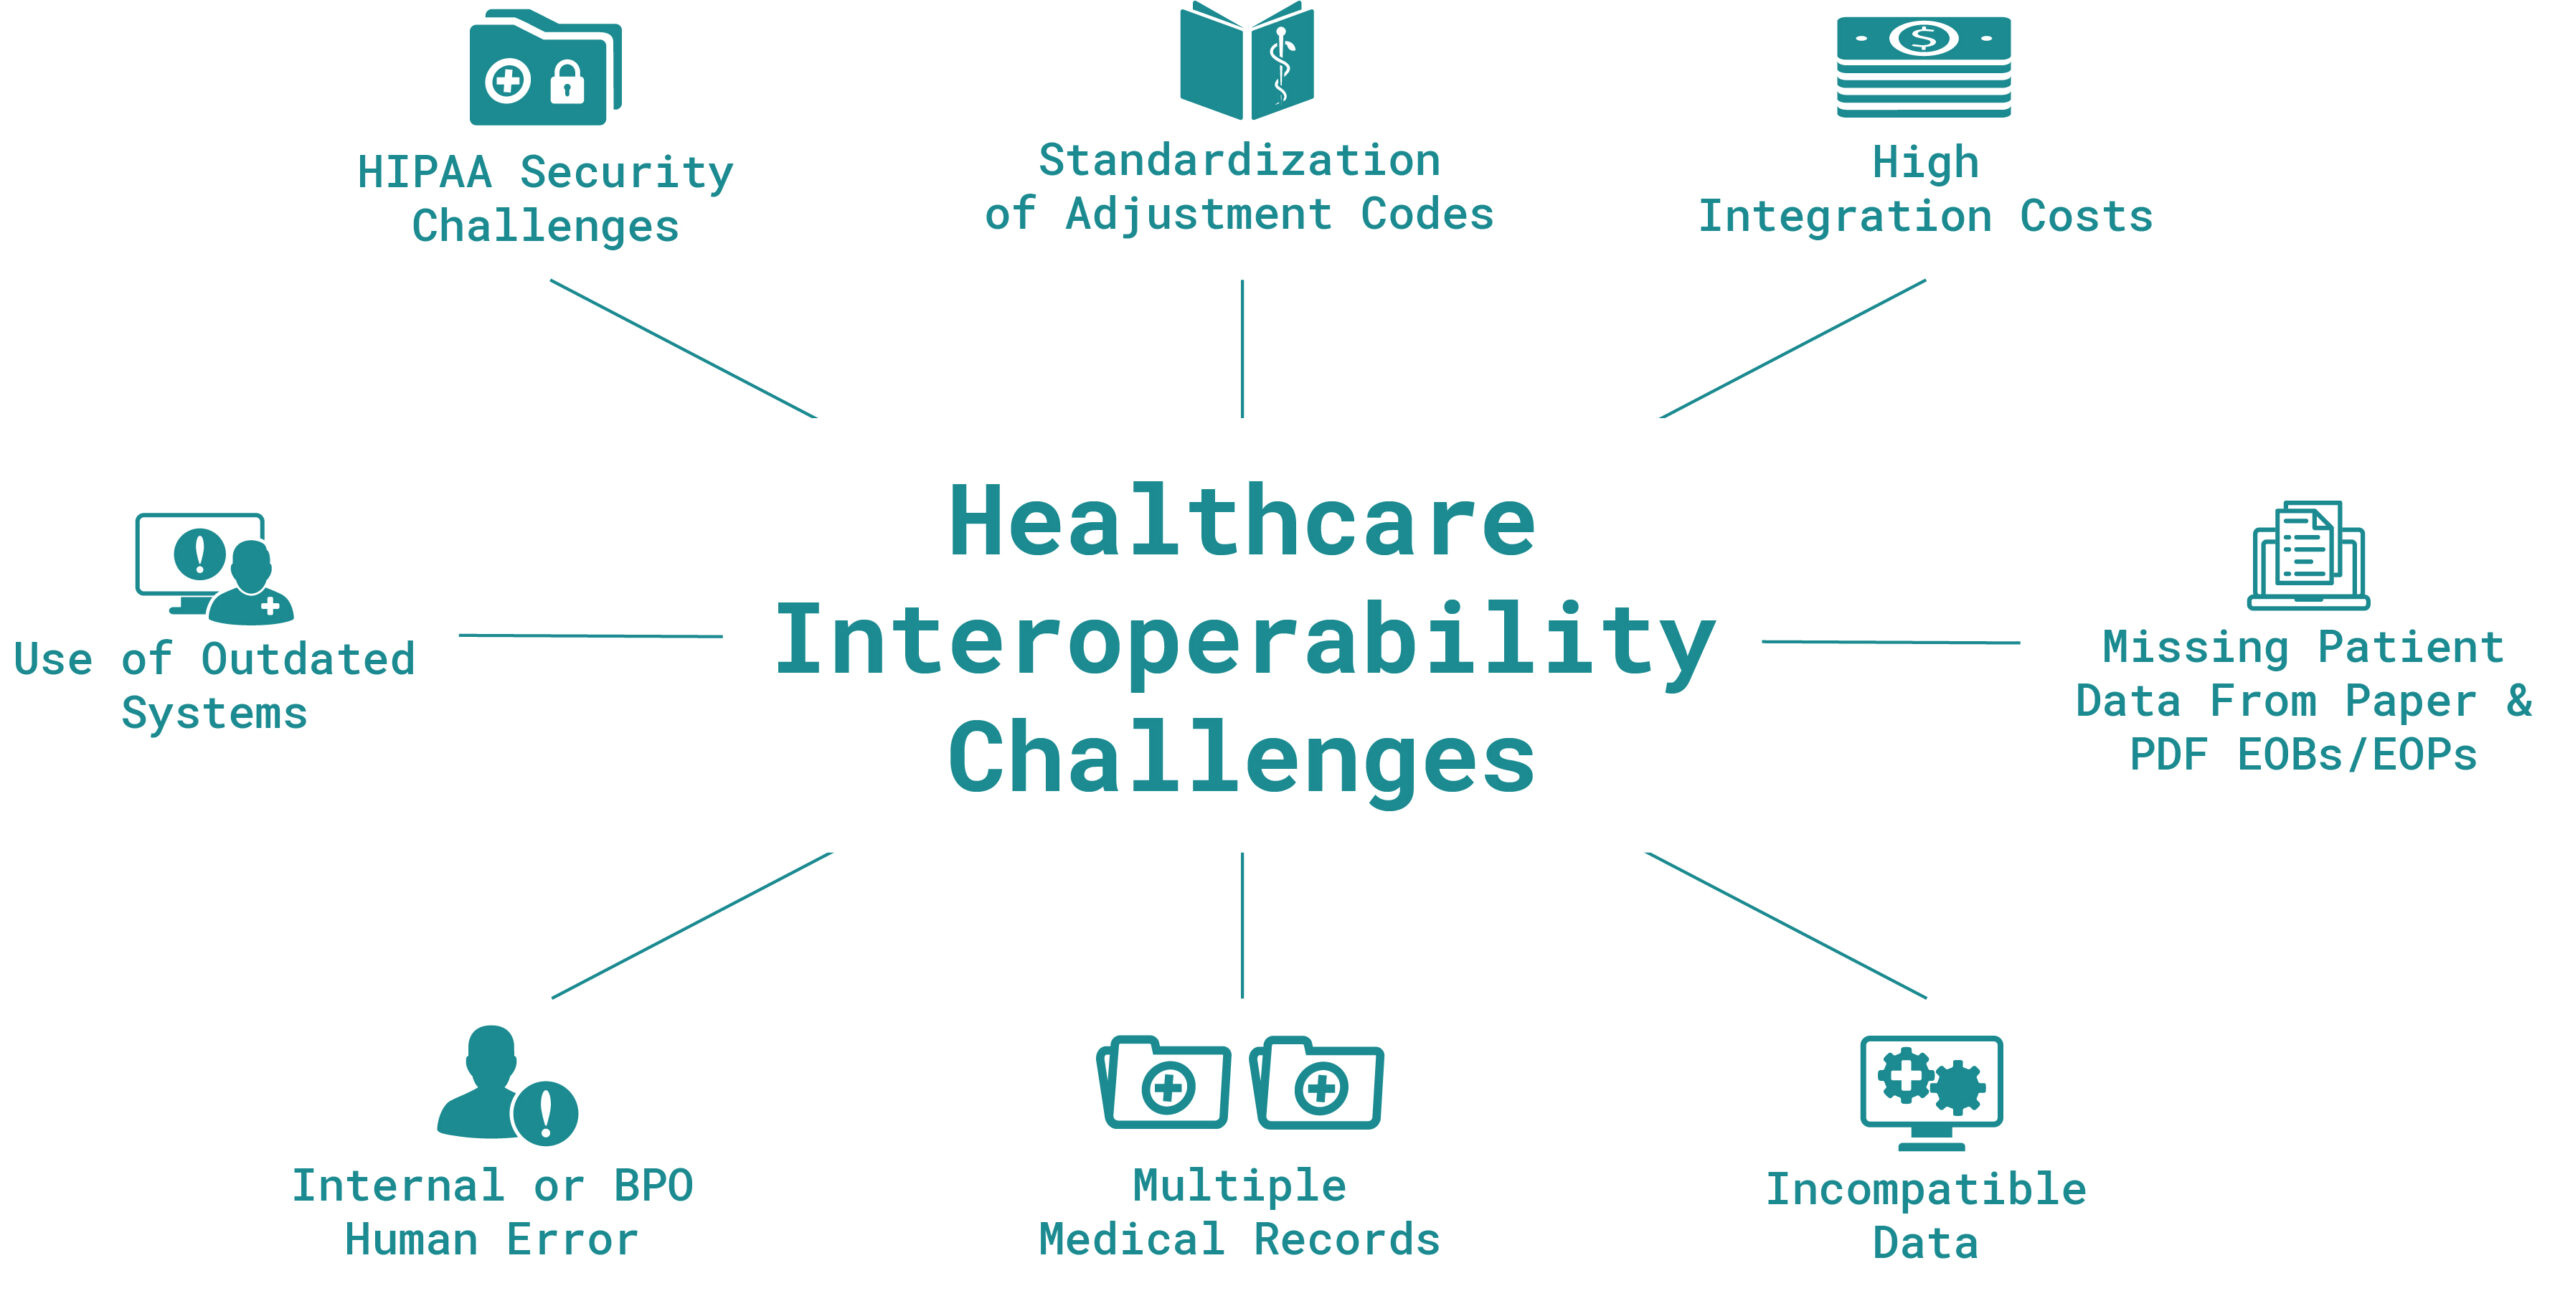 Healthcare Interoperability Challenges final